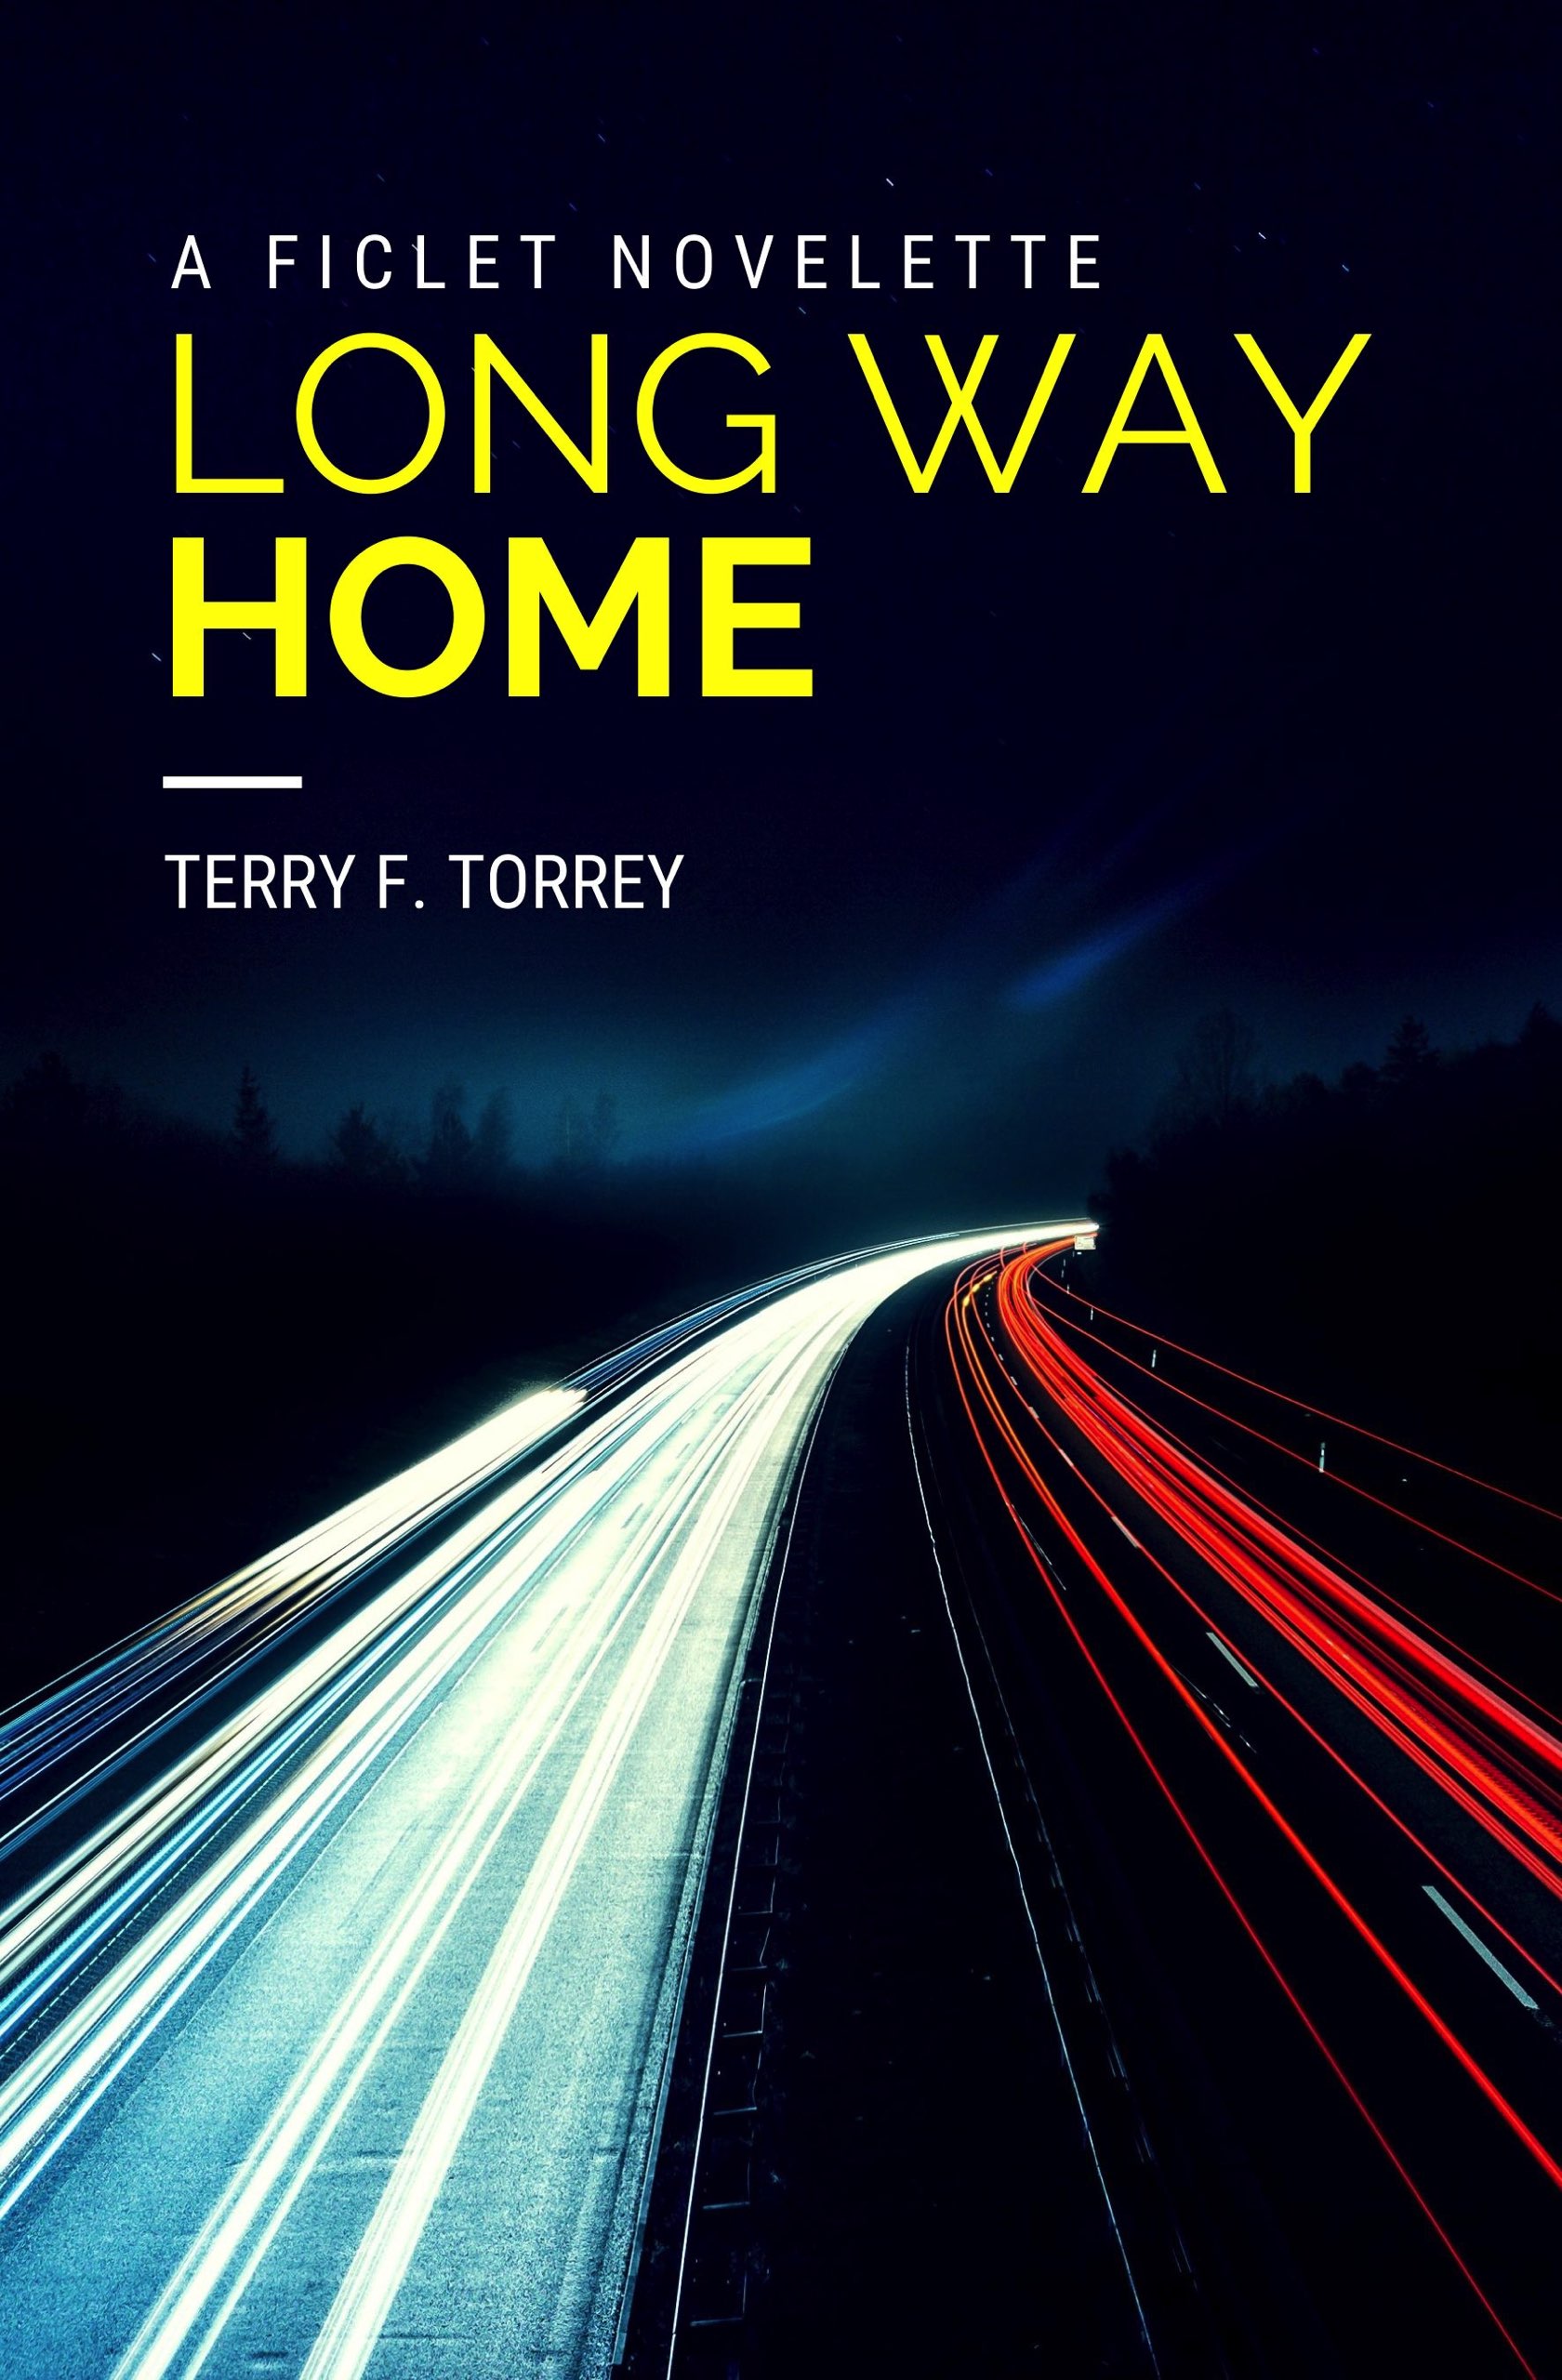 Cover of Long Way Home: A Ficlet Novelette by Terry F. Torrey